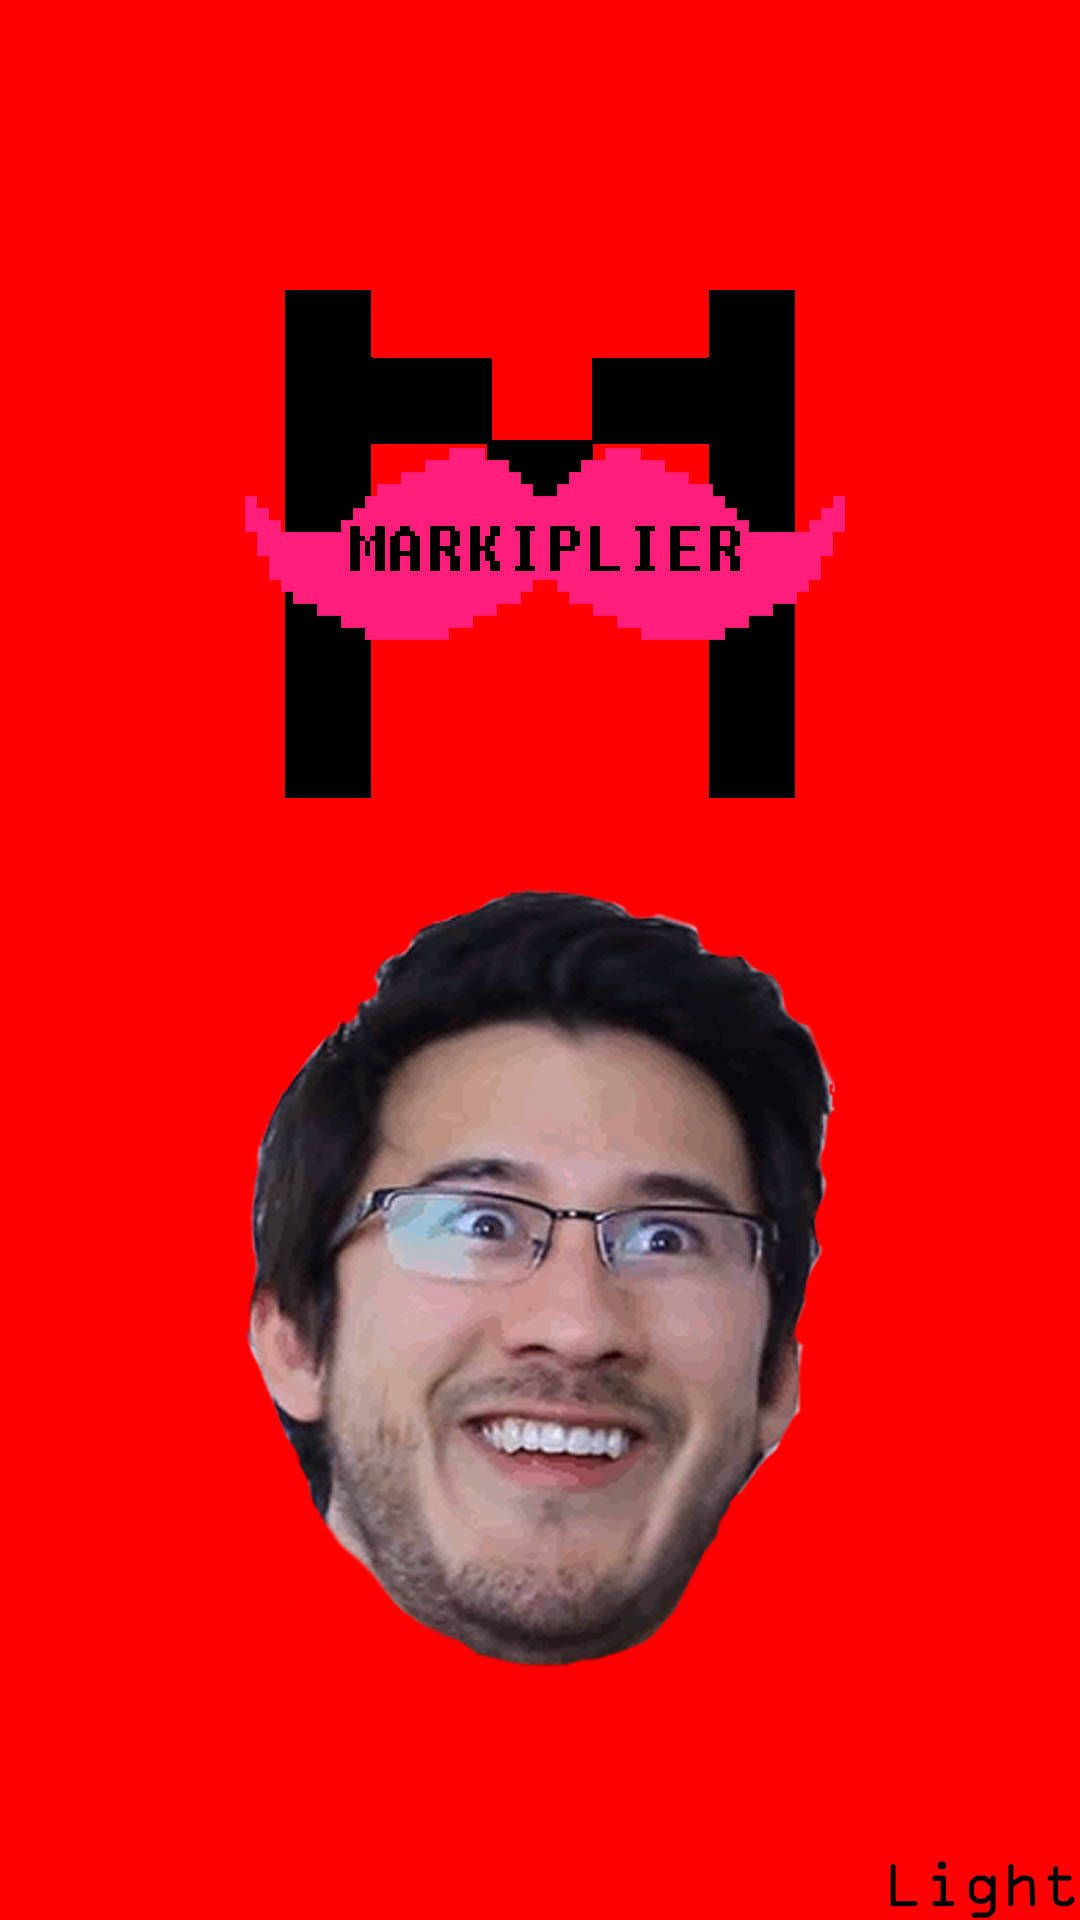 A man with glasses and mustache on red background - Markiplier